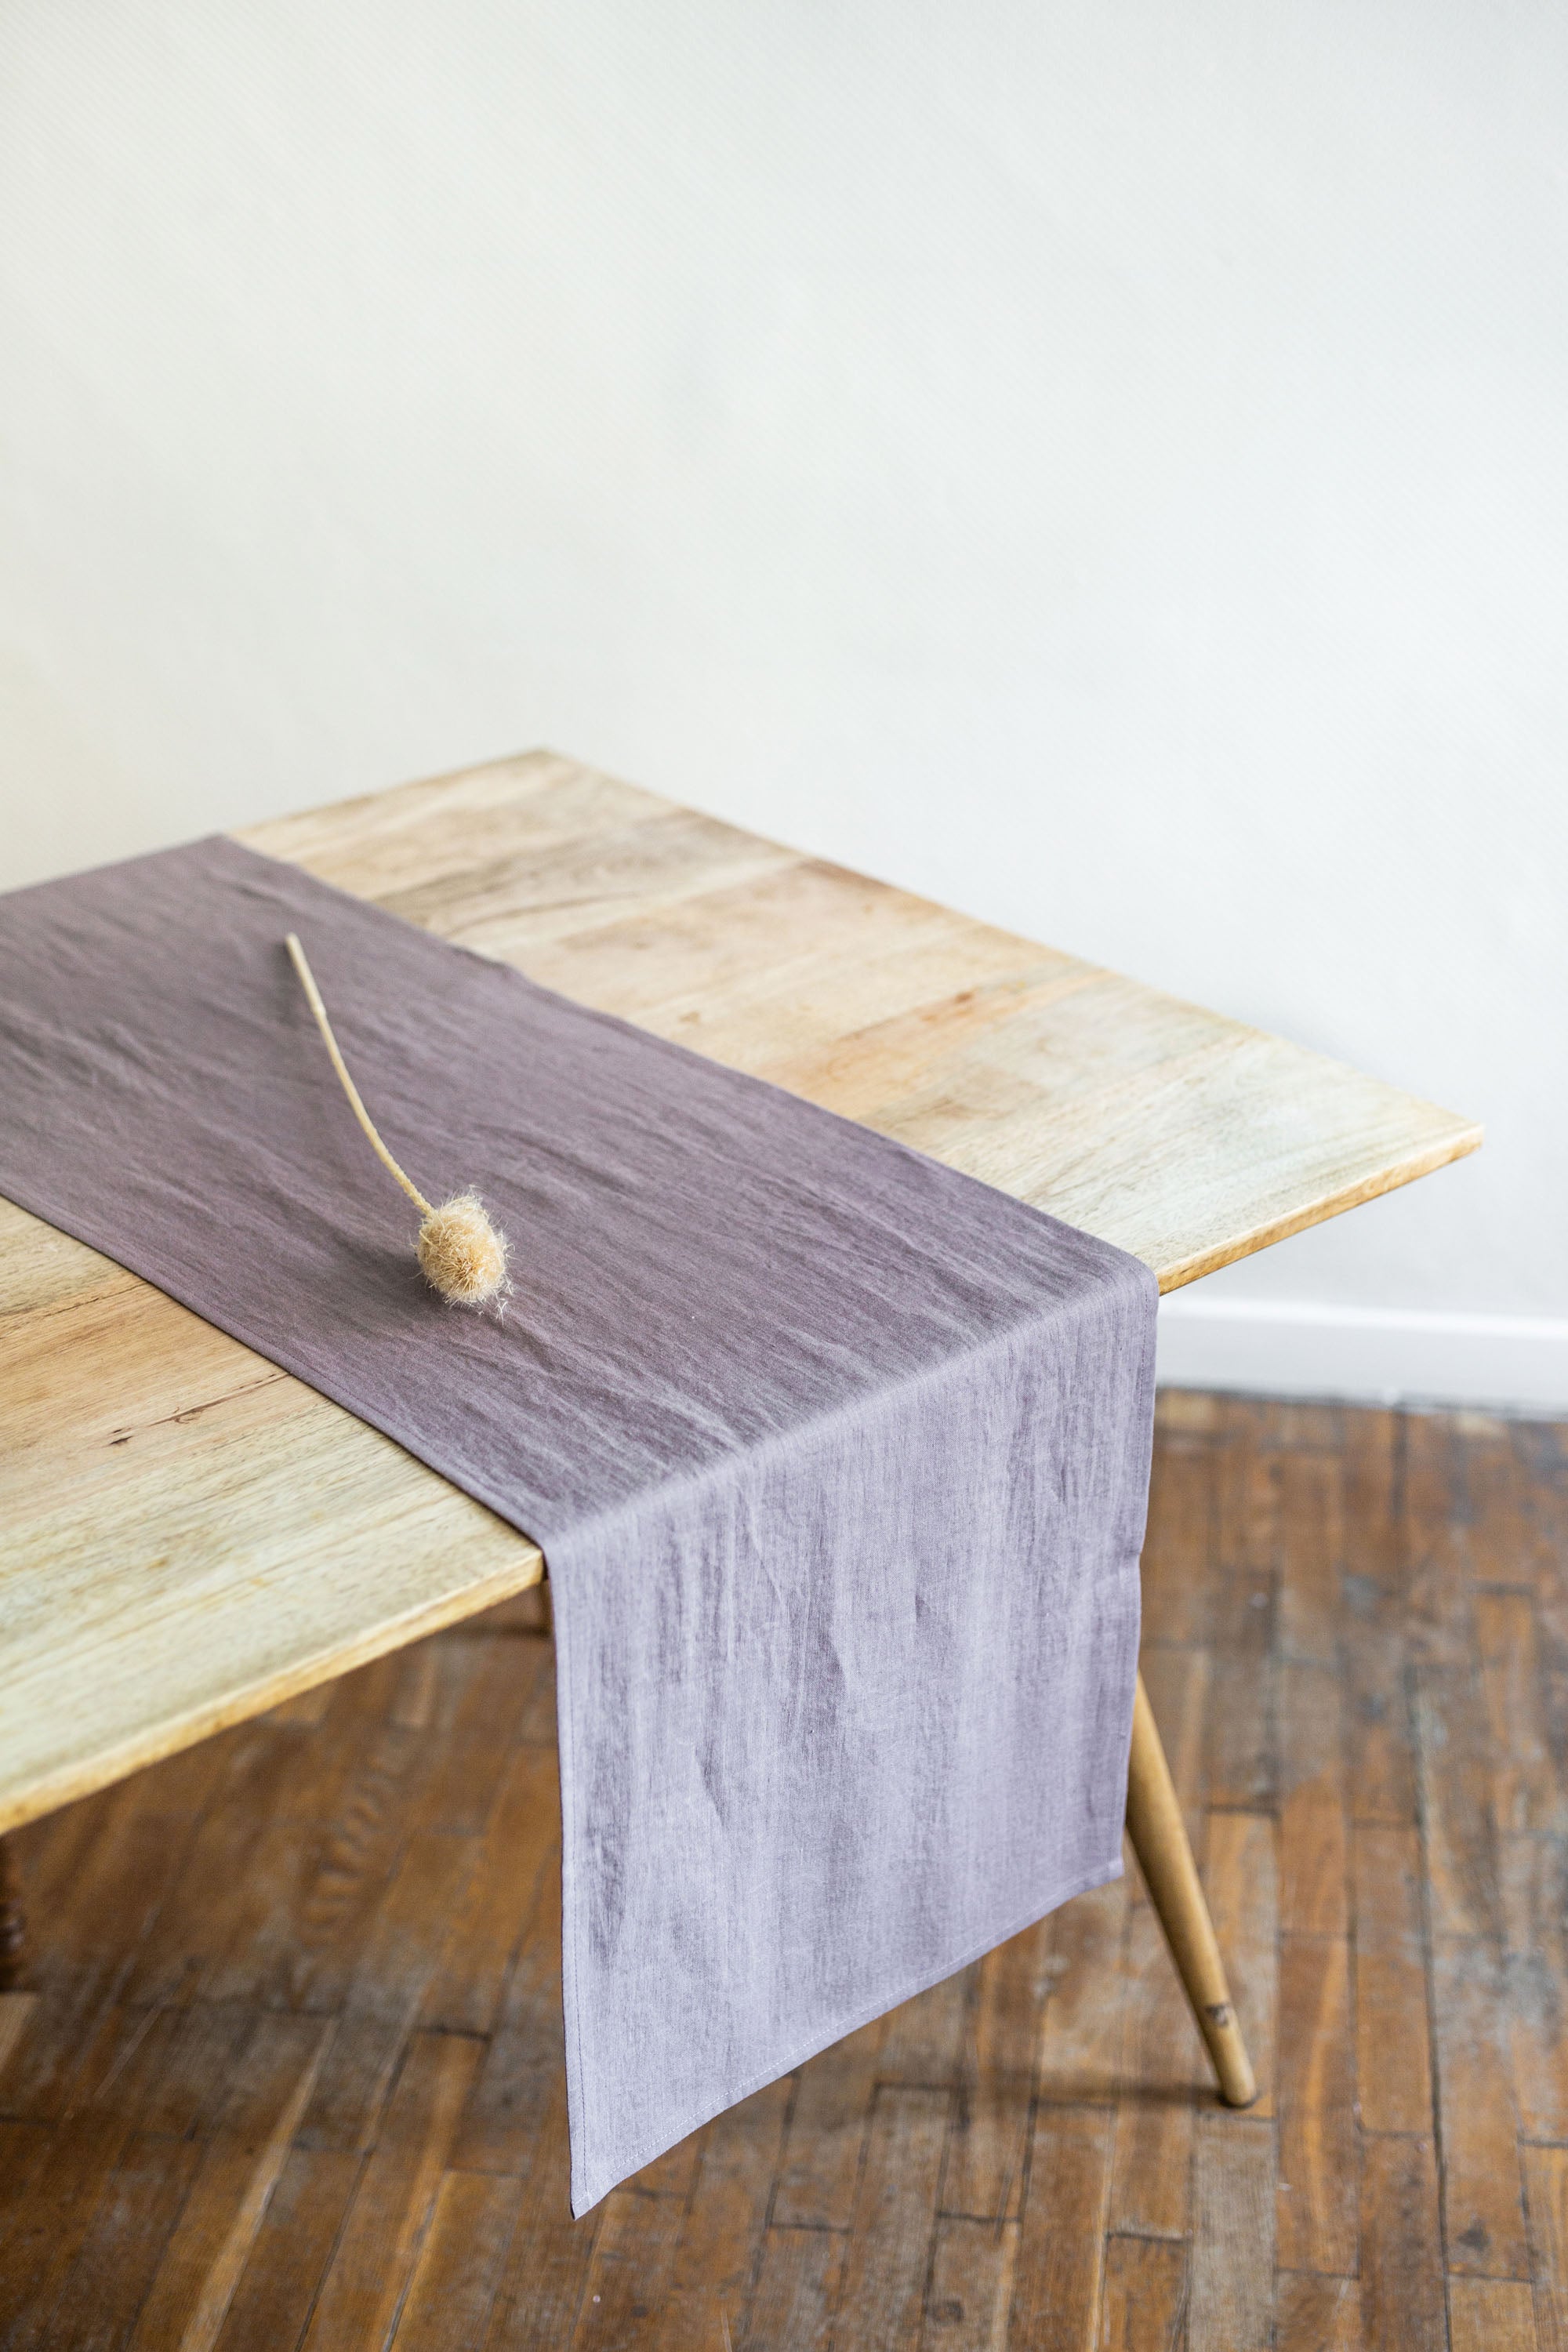 Table With A Dusty Lavender Table Runner On Top By AmourLinen